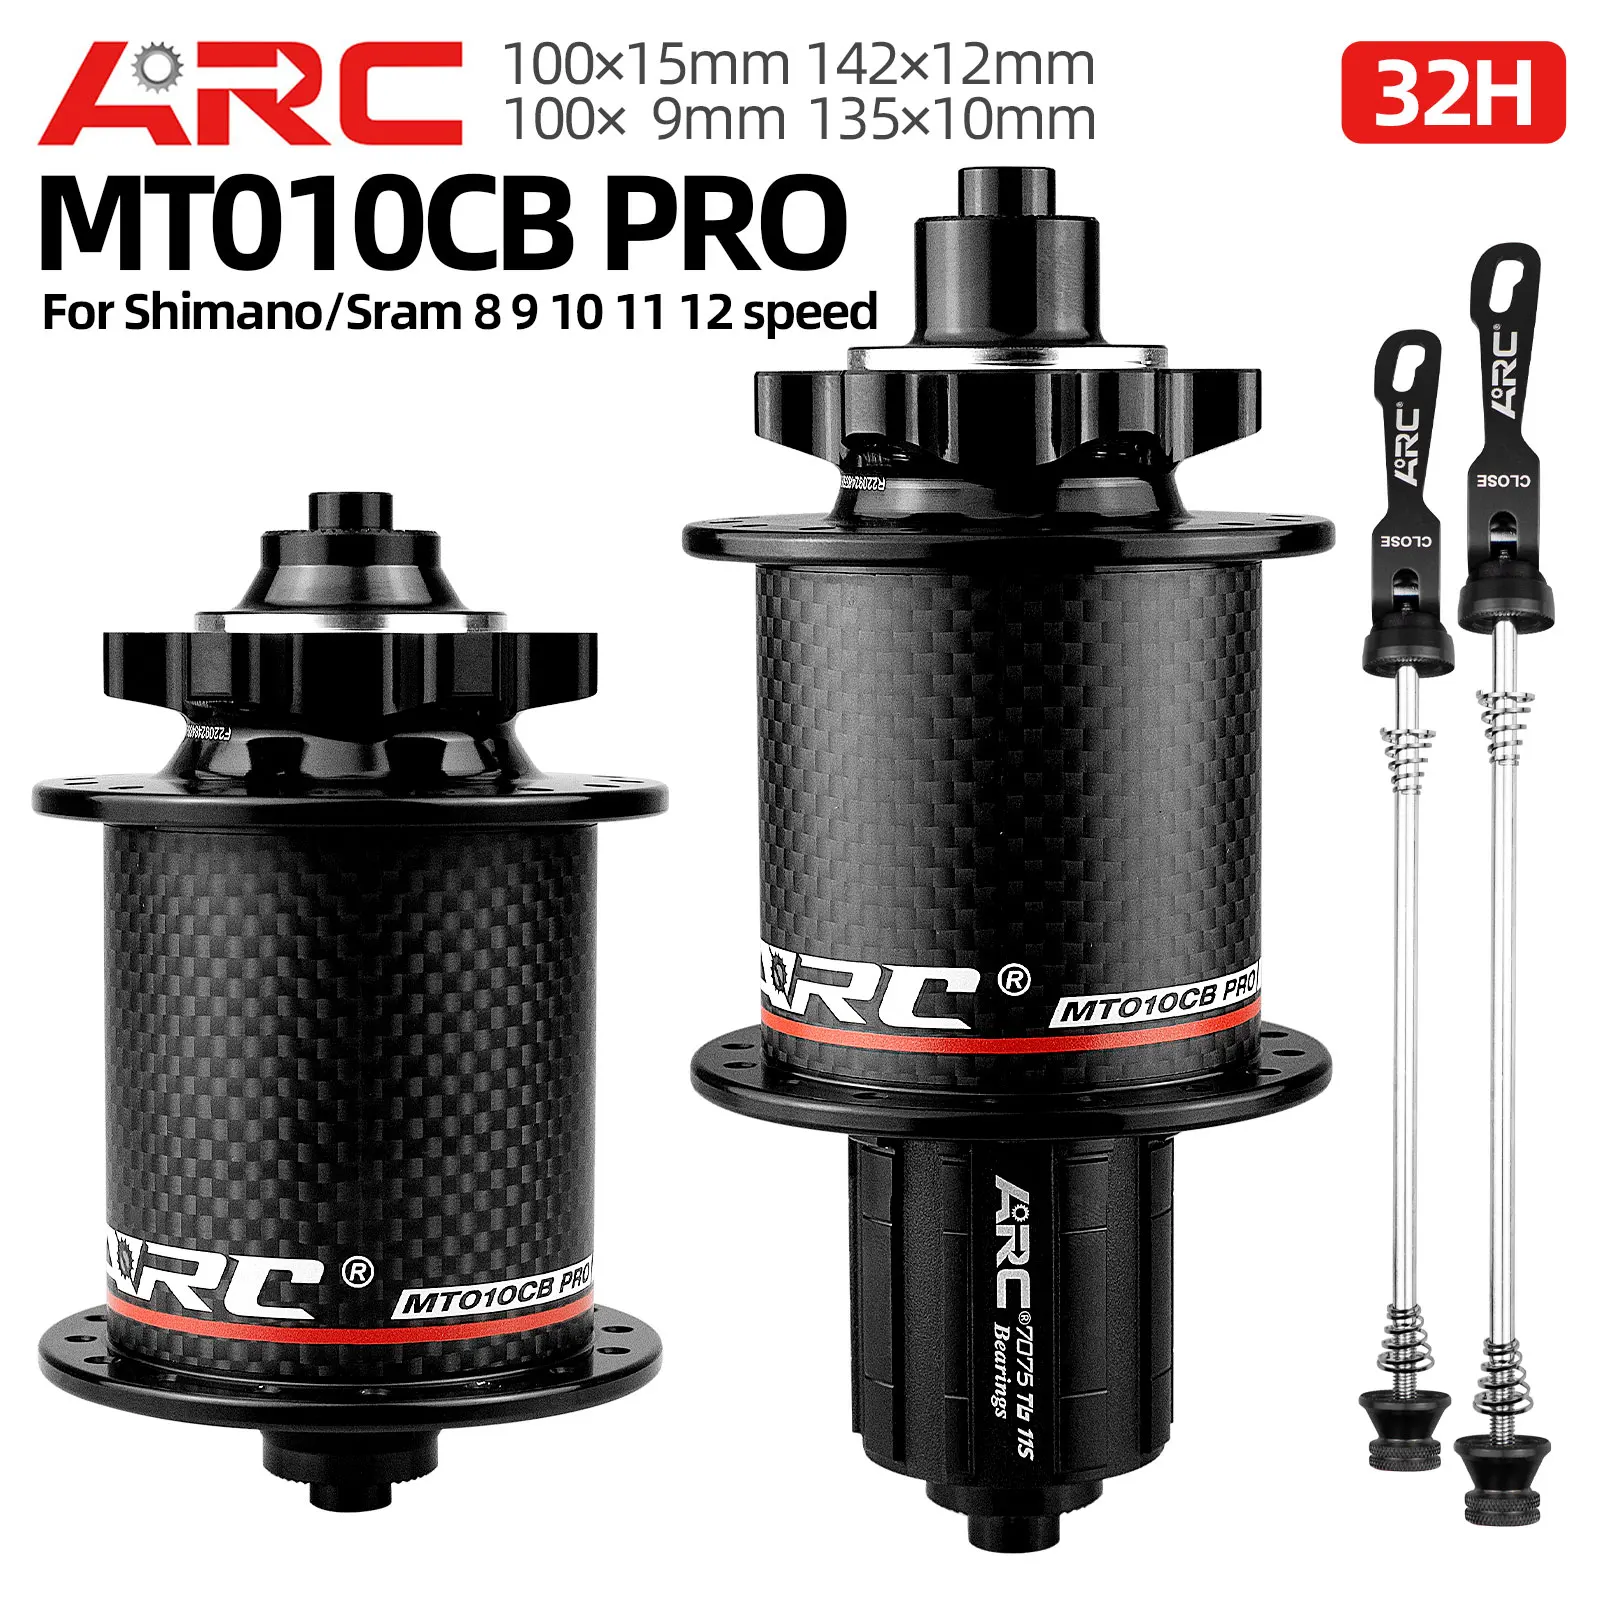 

ARC MT010 Pro 4 IN I MTB Bike Hub Carbon Fiber Mountain Bicycle Hubs 4 Sealed Bearing 6 Pawls 114 Click For HG 8 9 10 11S XD MS